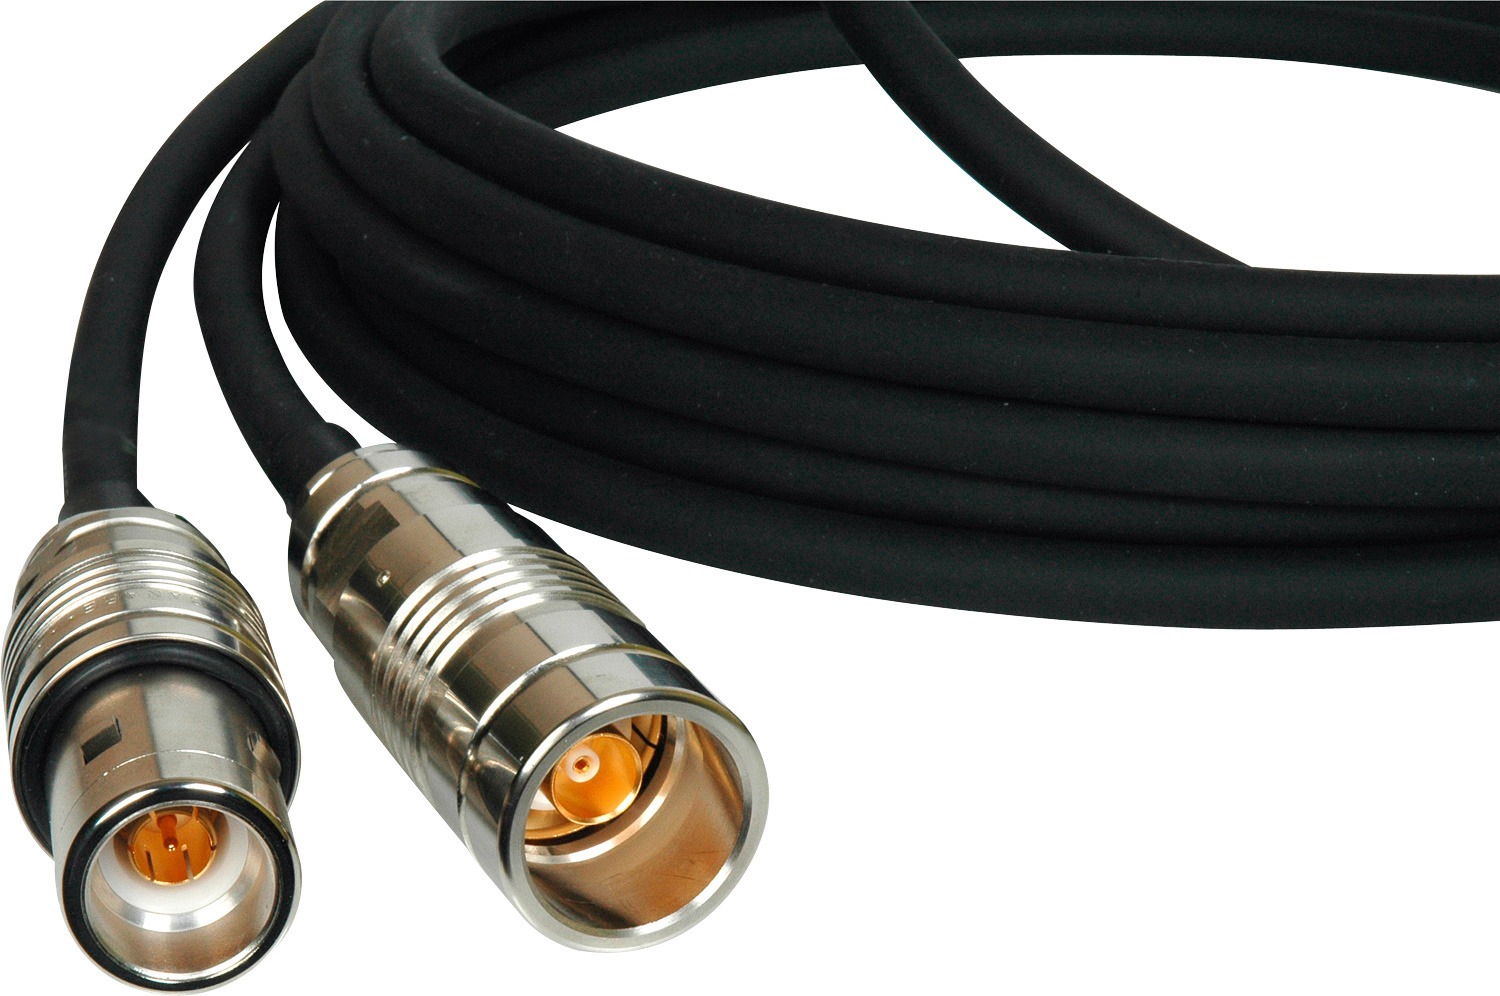 Laird TRI-1857A-82 Belden 1857A RG59/U Stranded Triax Male to Female Cable - 82 Foot